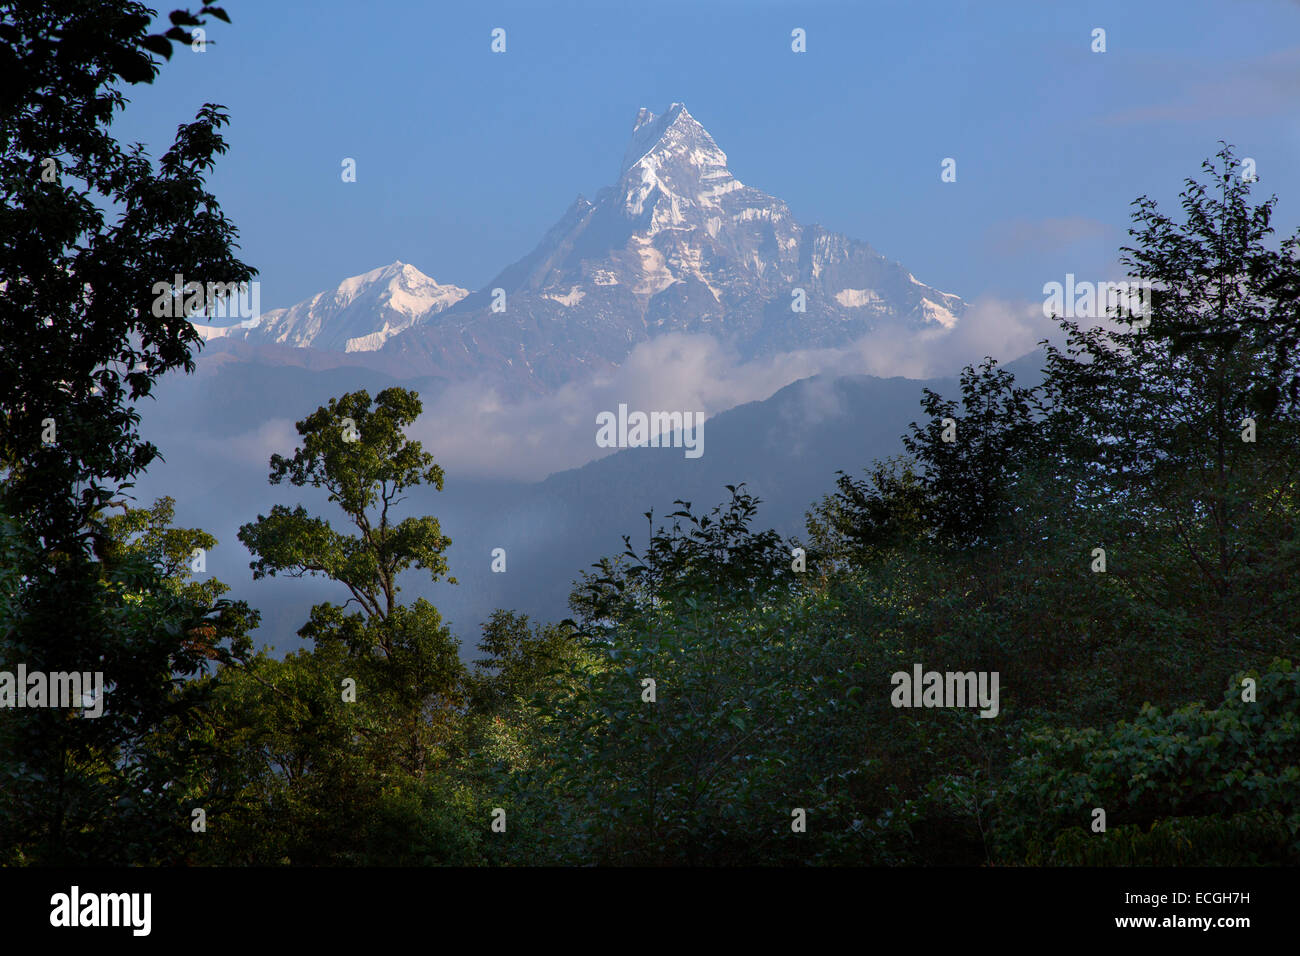 The Mountain Annapurna and Machhapuchchhre or Fishtail Mountain  from the village of Ghandruk Stock Photo